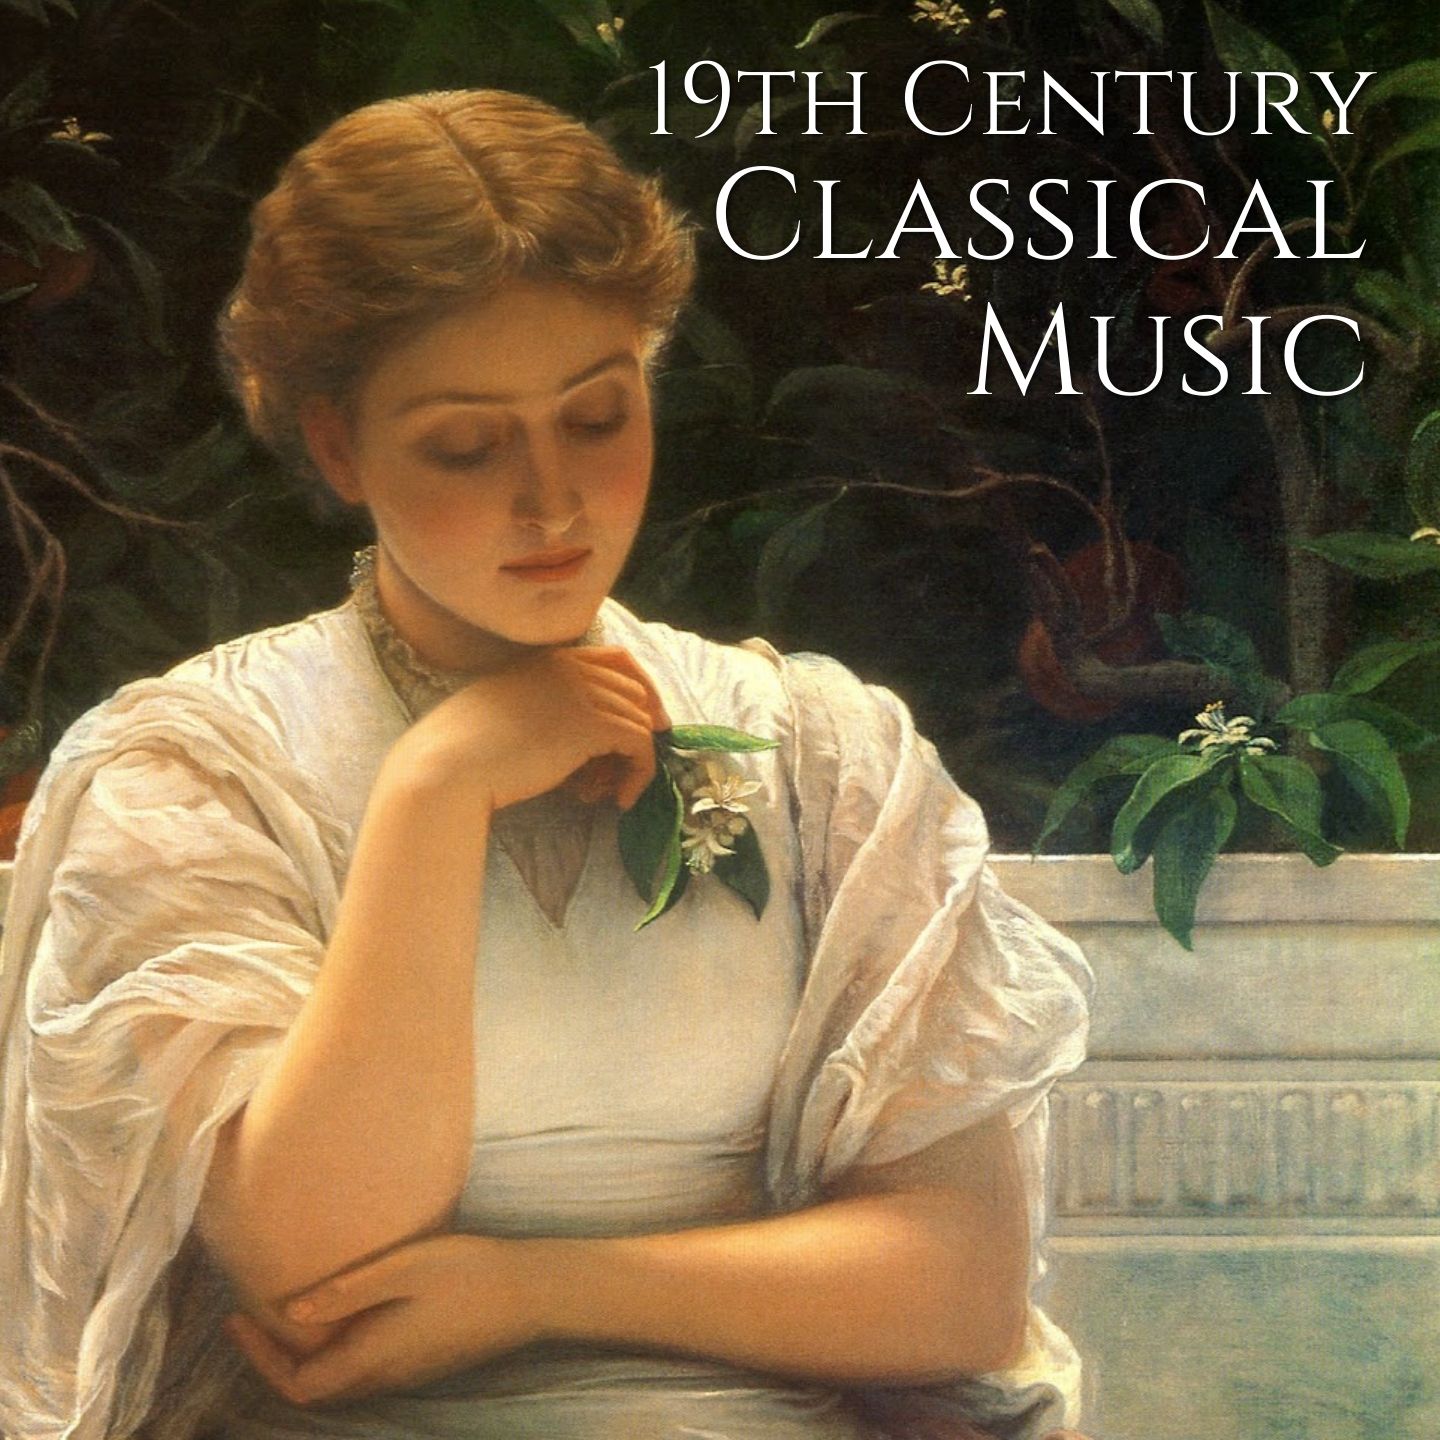 Classical Music from the 19th Century